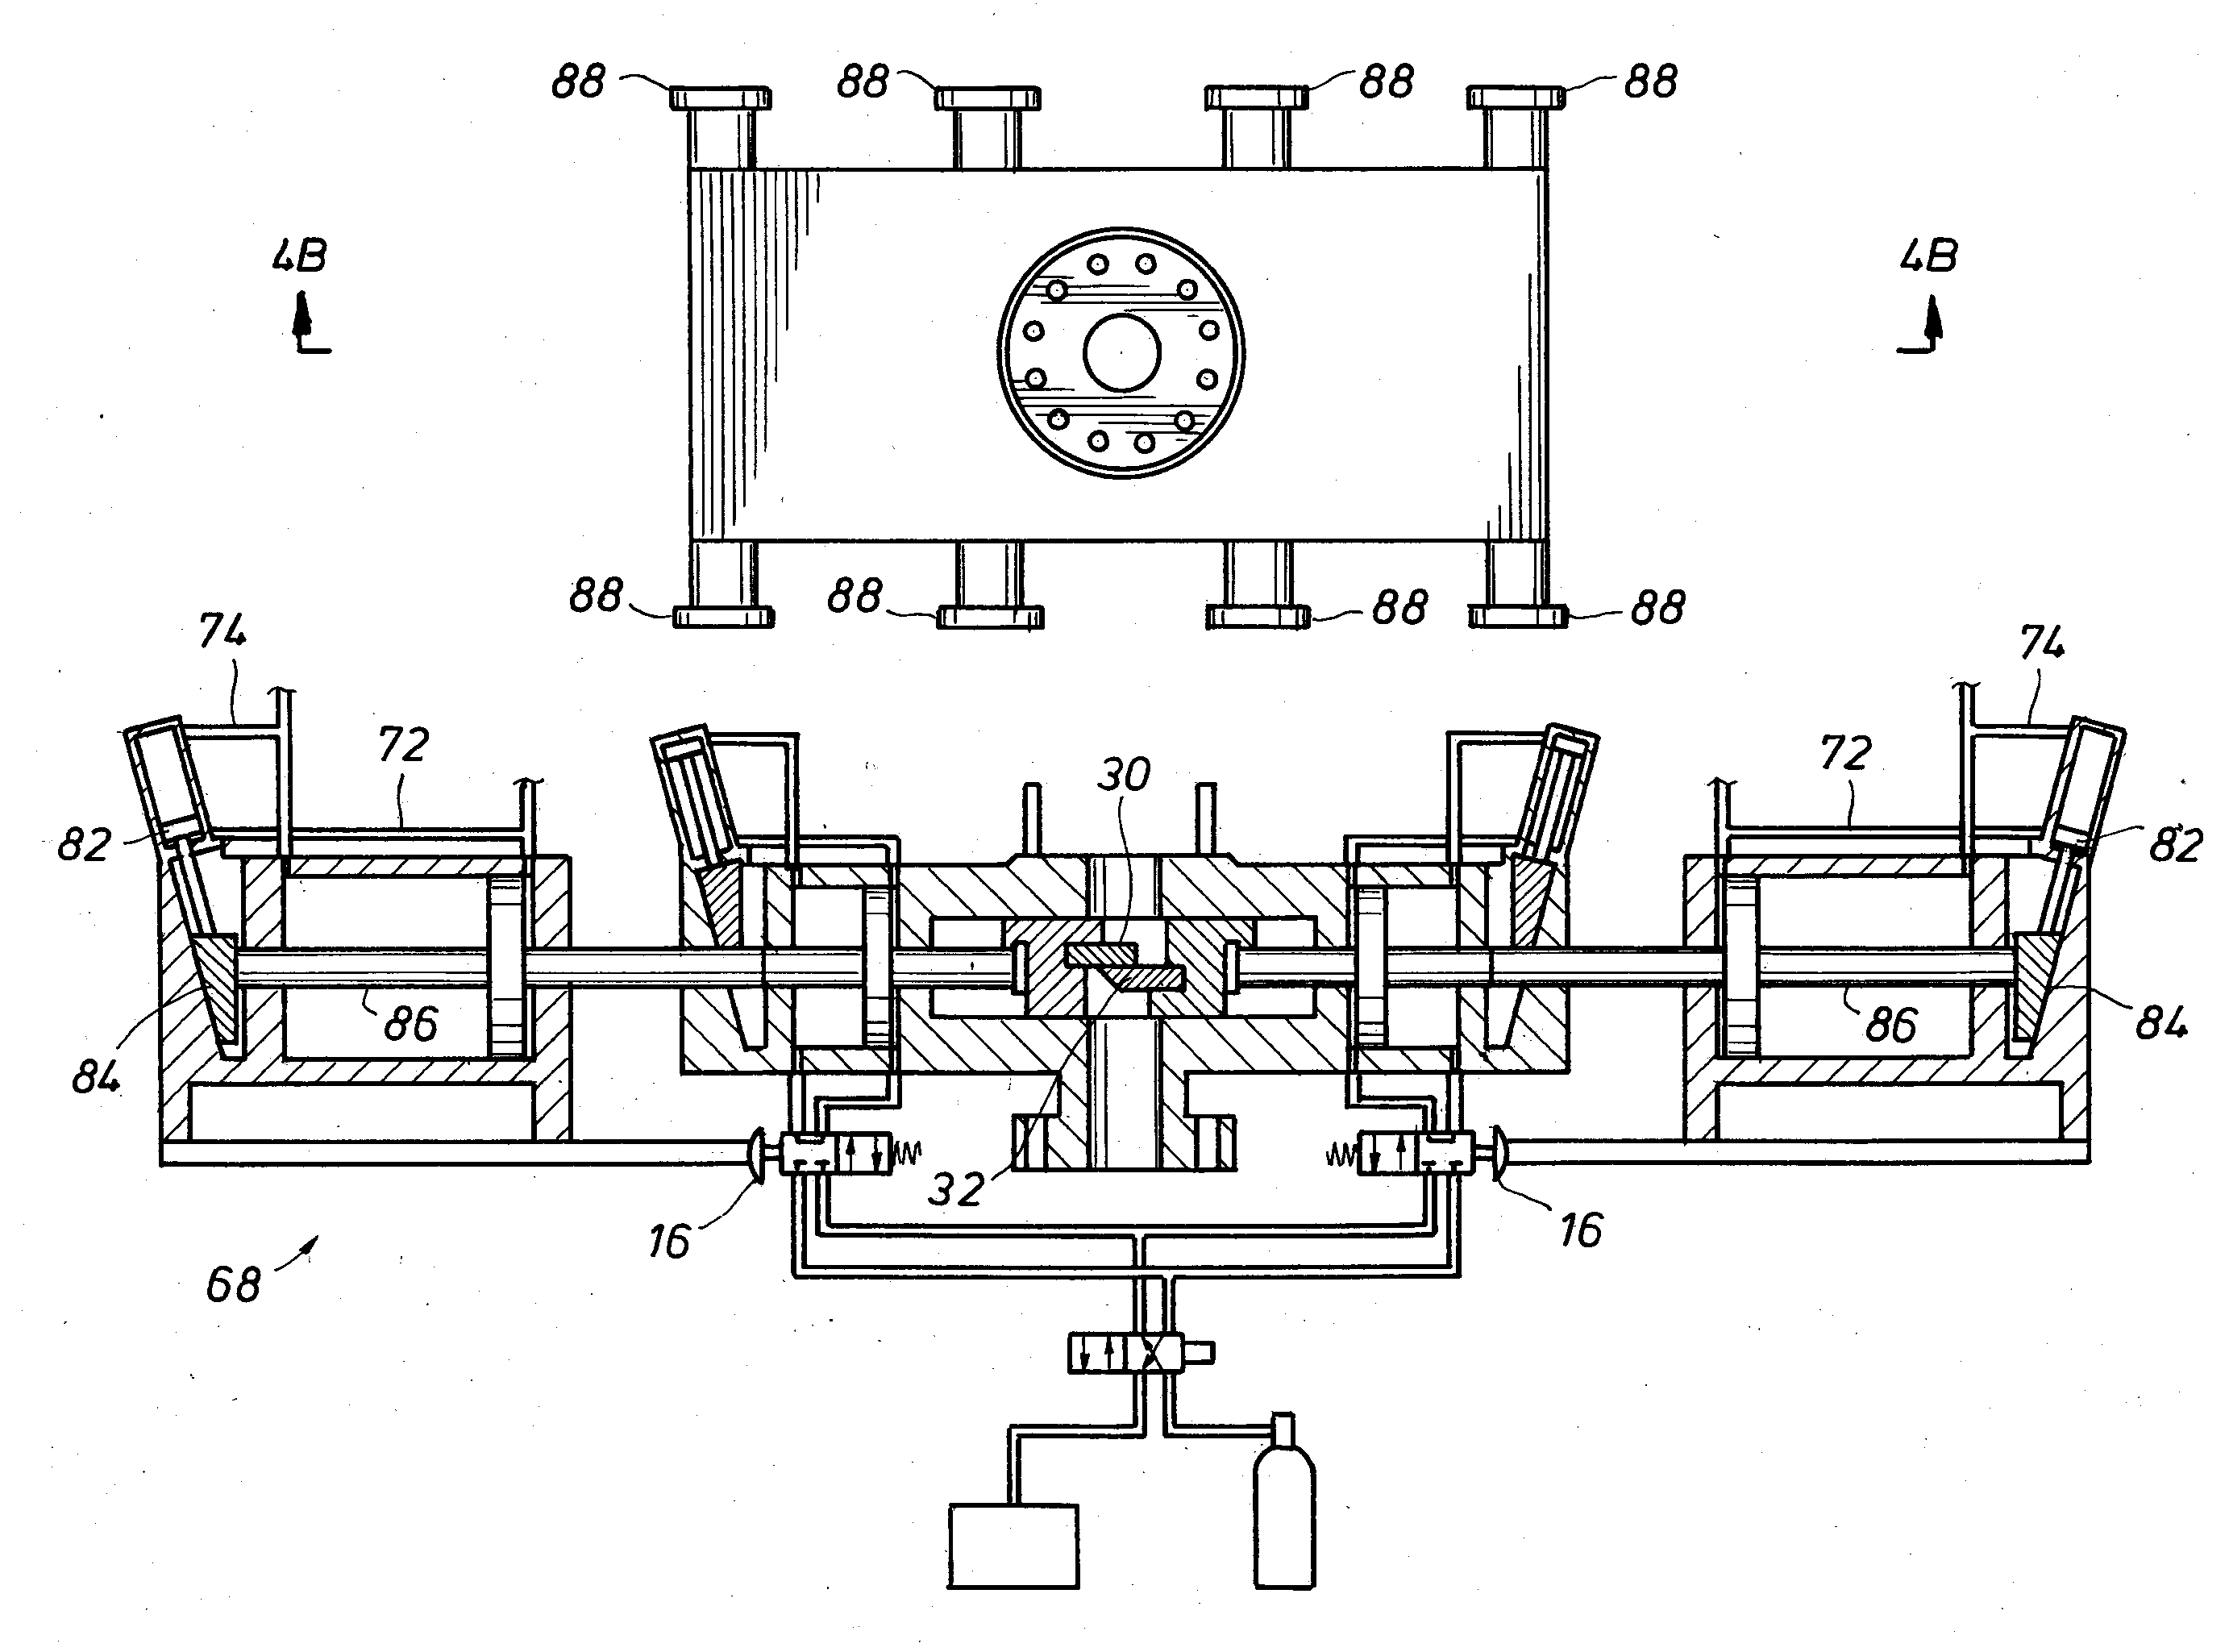 System and Method for Rescuing a Malfunctioning Subsea Blowout Preventer